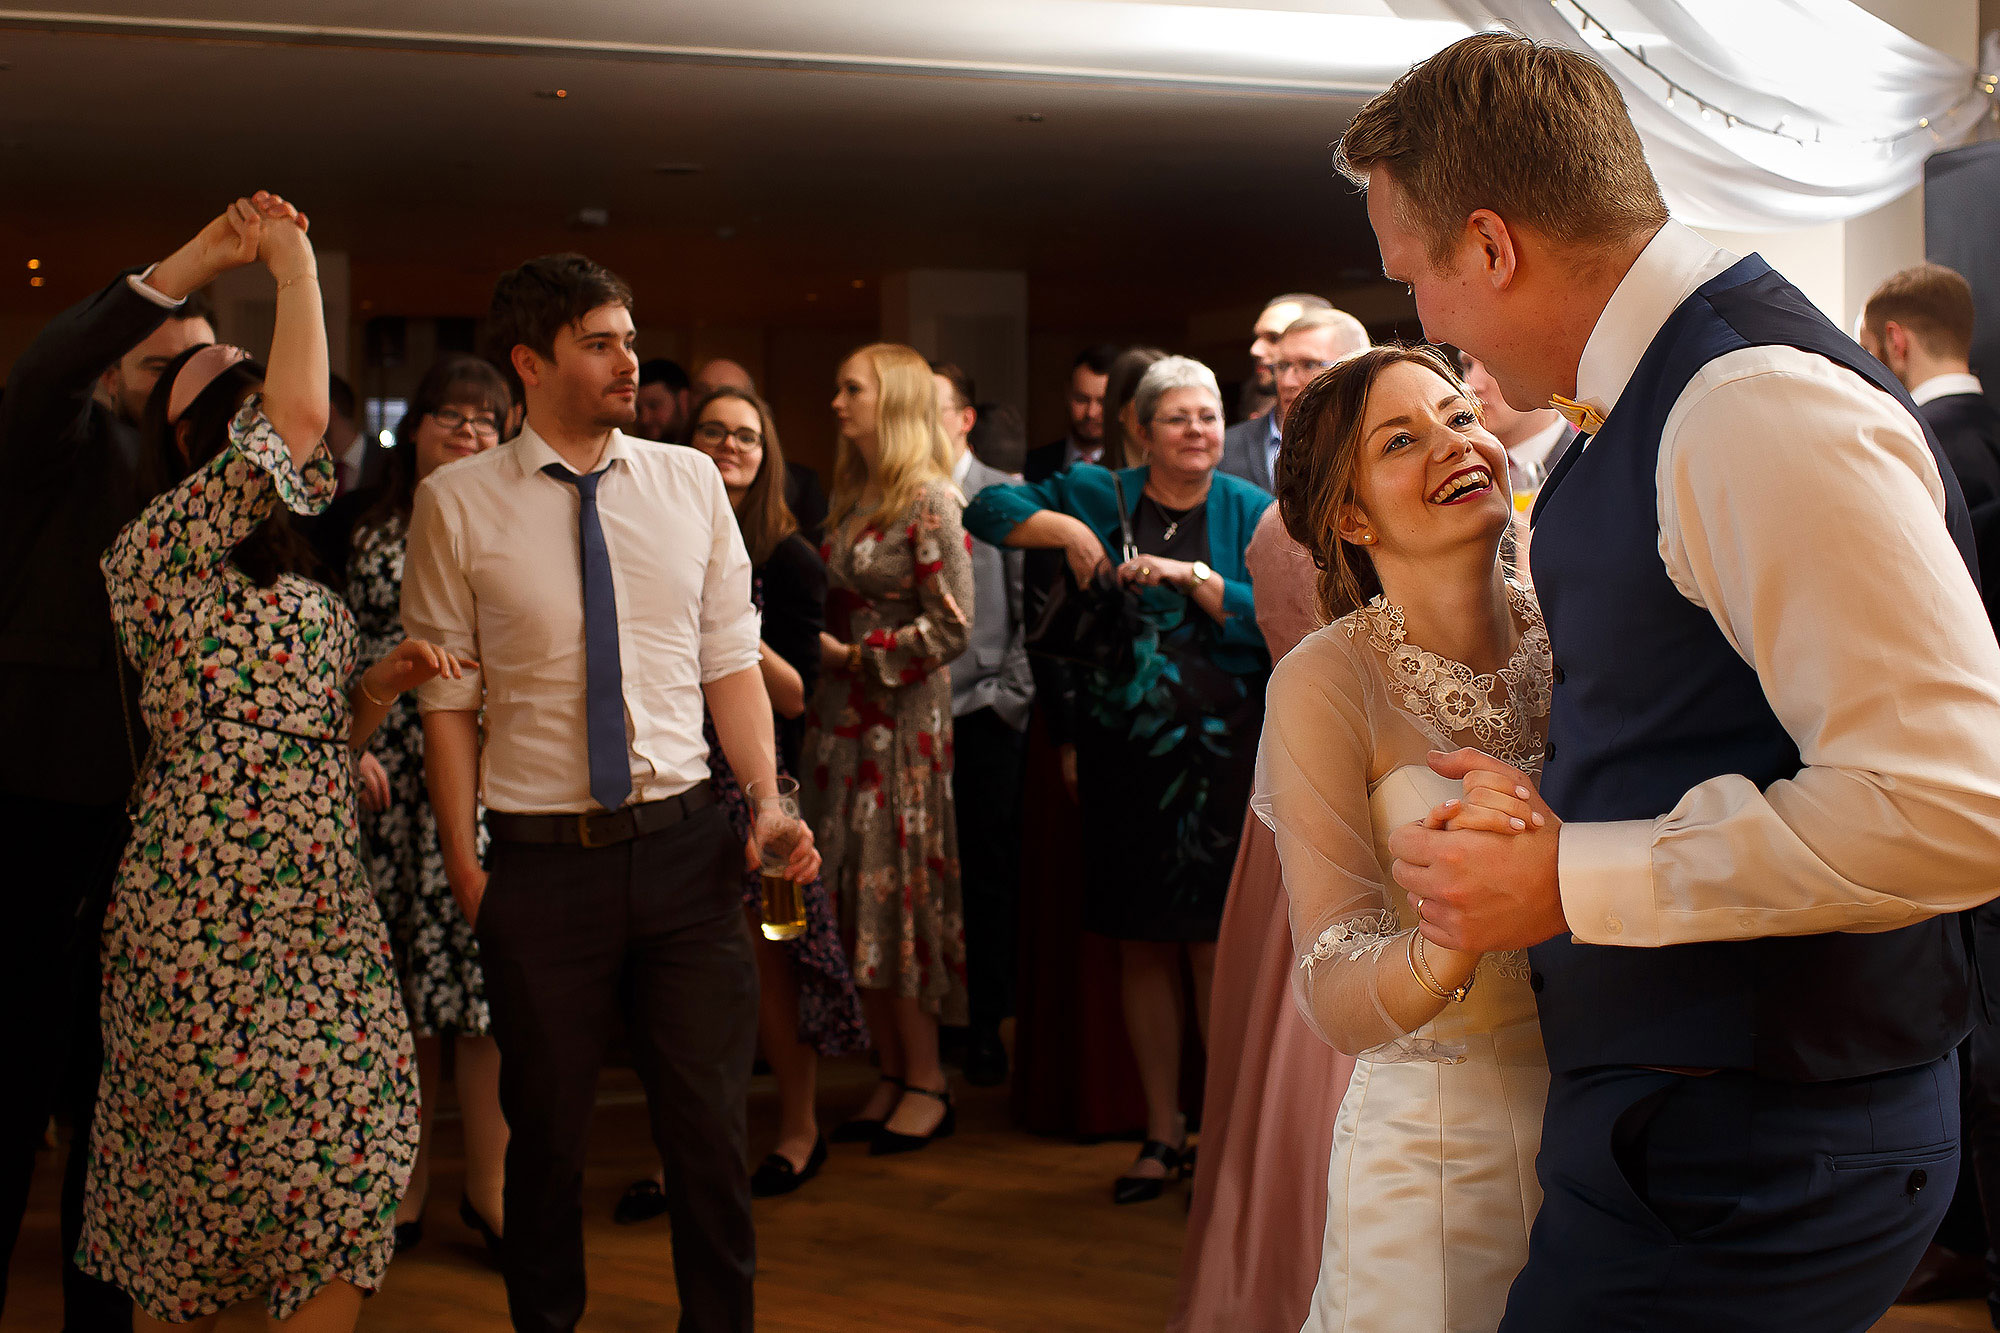 Bride and groom dancing in each others arms on the dance floor | Mitton Hall wedding photographs by Toni Darcy Photography